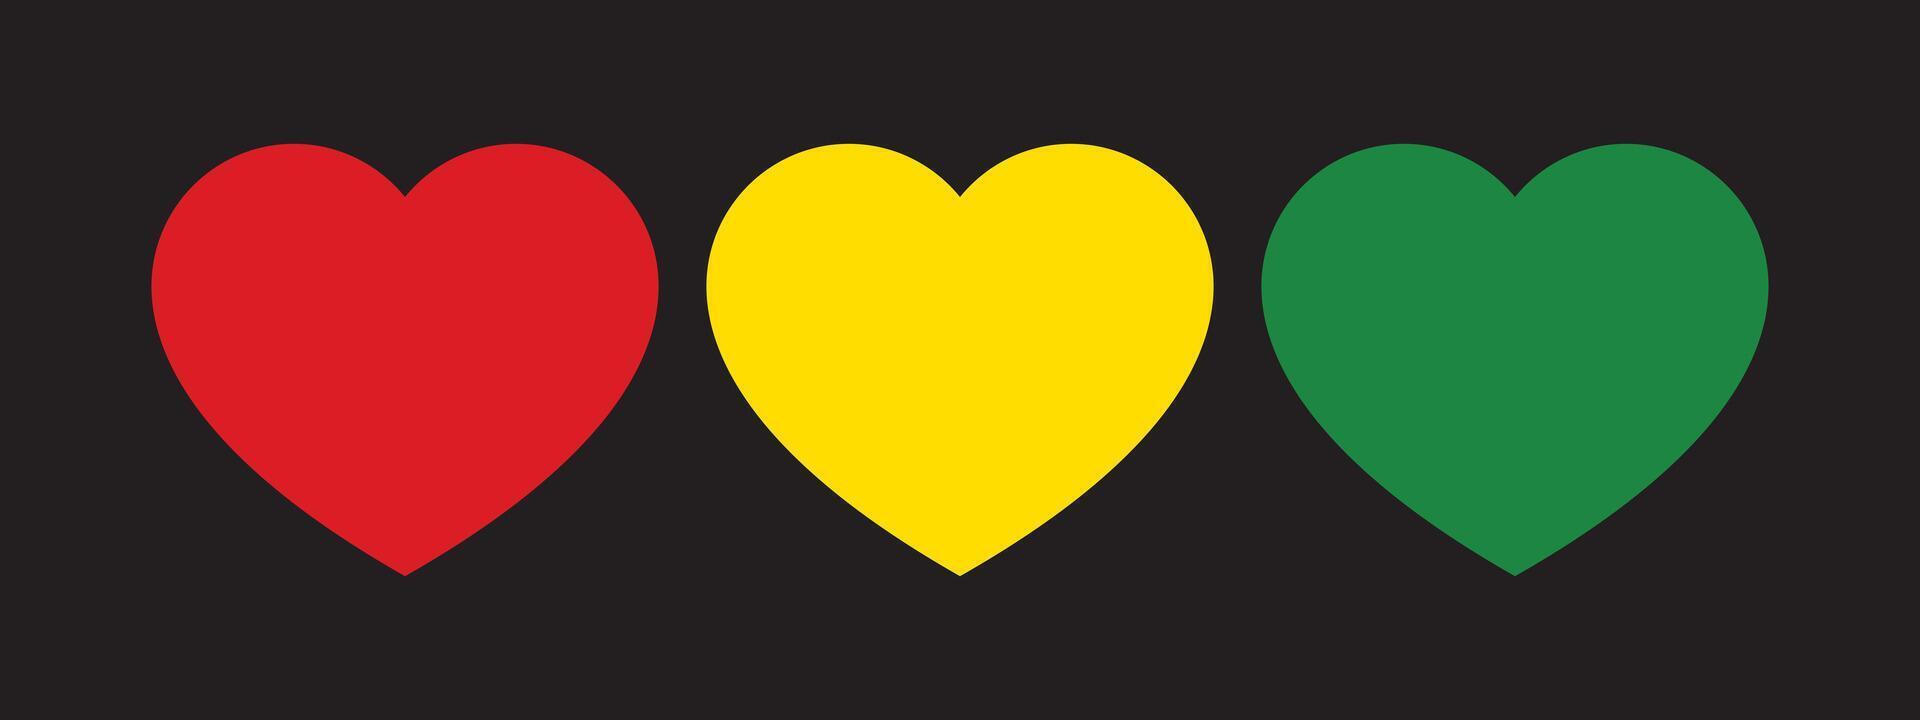 Red, yellow and green colored heart shape icon as the colors of Black History Month flag. Flat vector illustration.